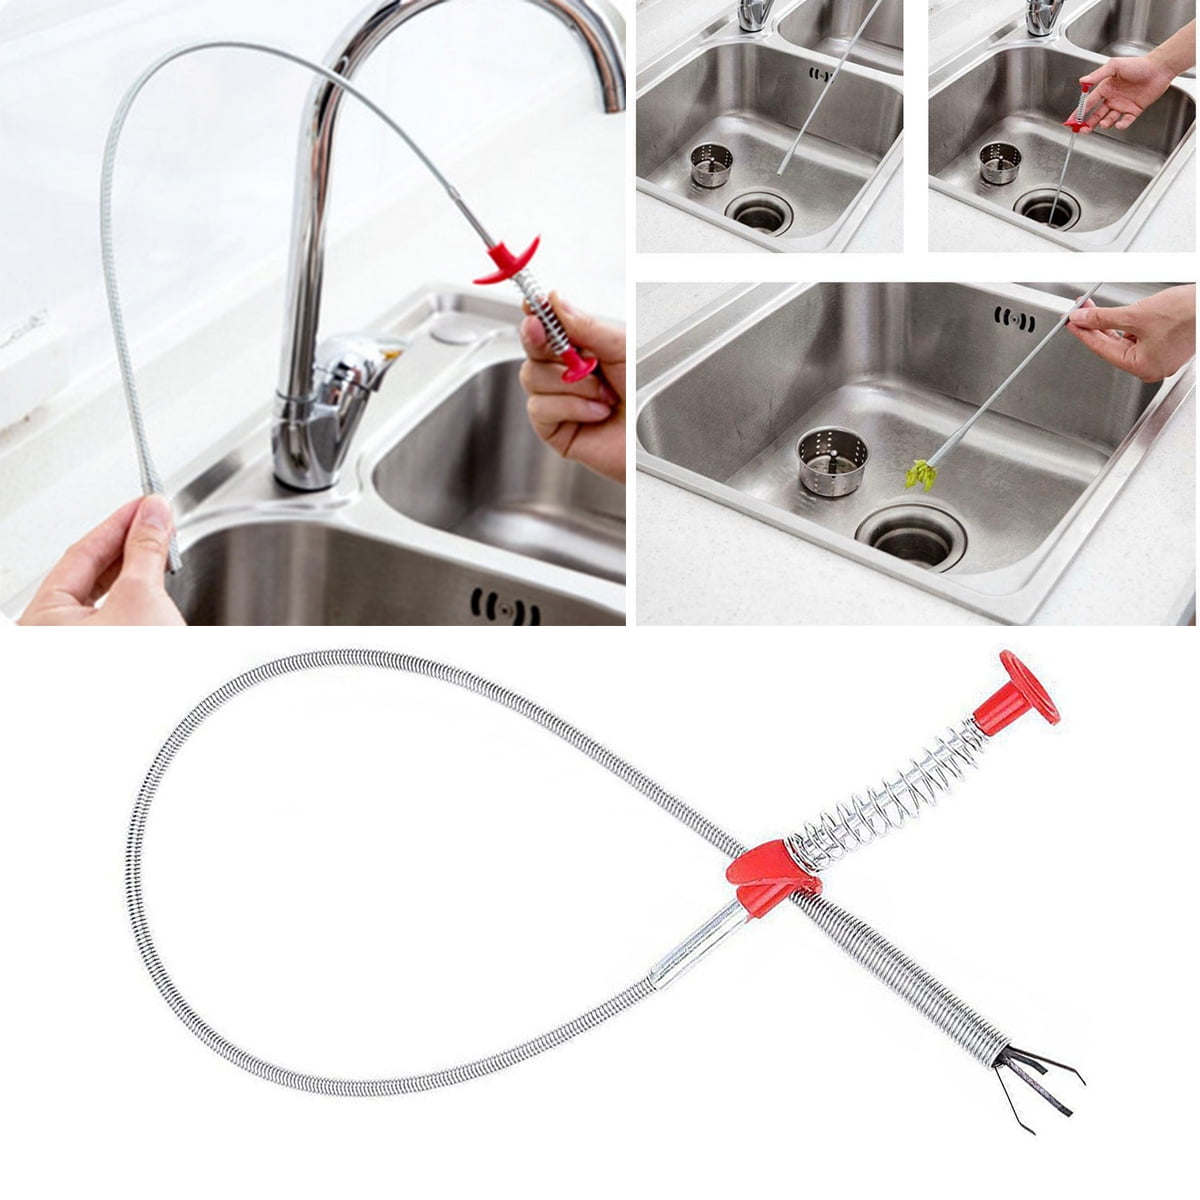 6 PCS Plastic Drain Augers Drain Clog Remover Kit Drain Hair Catcher Drain Snake Drain Cleaner Tools for Kitchen Sink Bathroom Tub Toilet Clogged Drains Dredge Pipe Sewers 